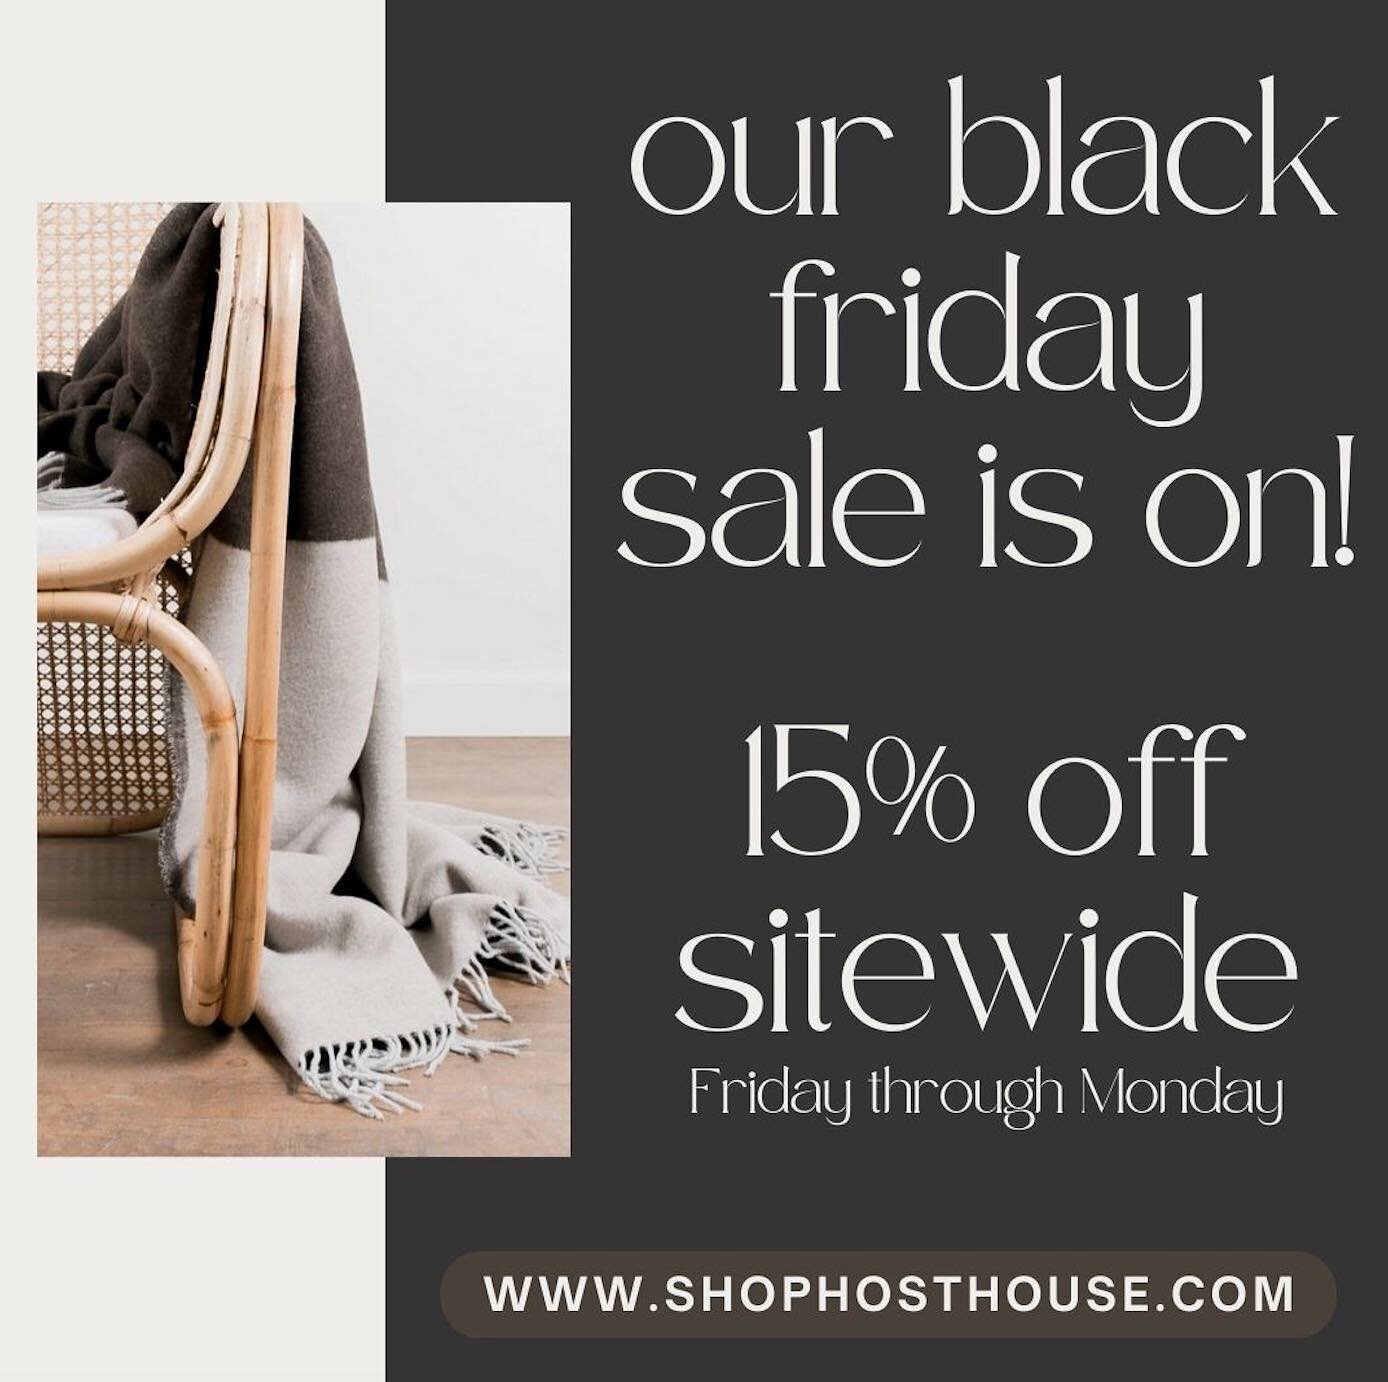 Our Black Friday sale is on! Shop 15% off sitewide now through Monday. No code needed, 15% added at checkout. Enjoy free shipping on orders over $100, or select local Carmel option to pick up in store. Shop link in bio! #hosthousecarmel #hosthouse #m